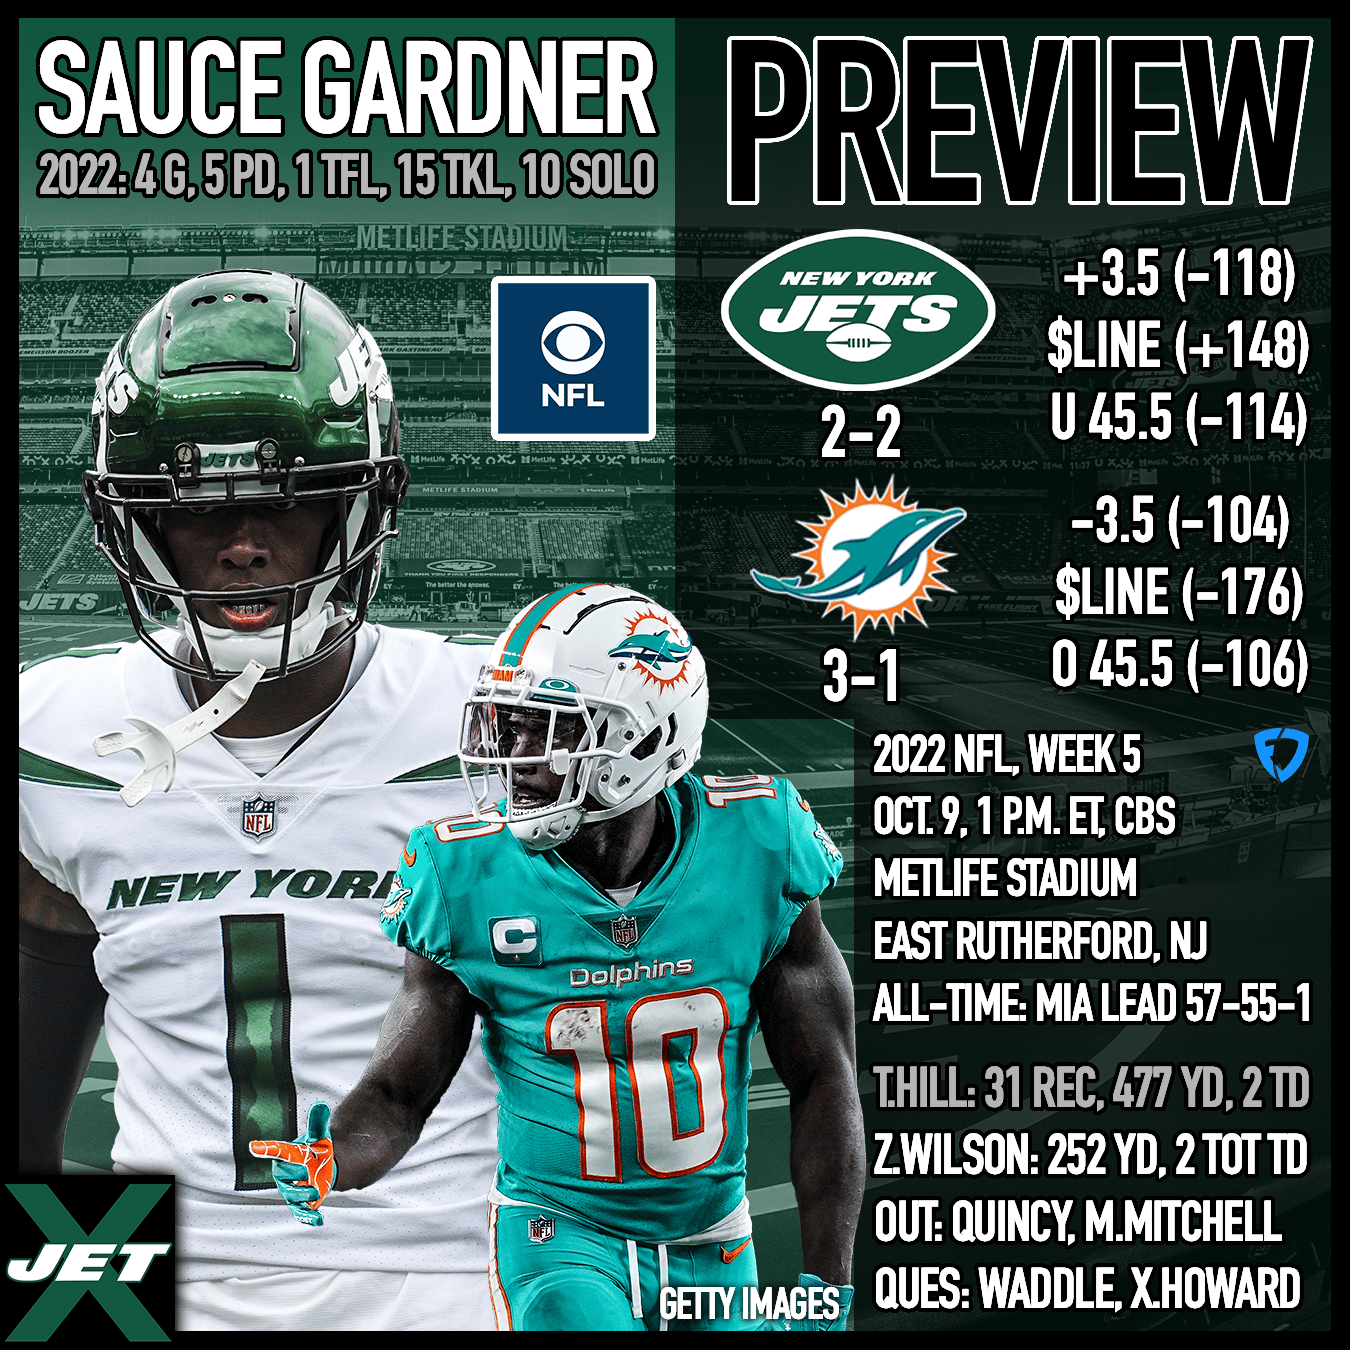 New York Jets, Miami Dolphins, 2022, Week 5 Preview, Sauce Gardner, Tyreek Hill